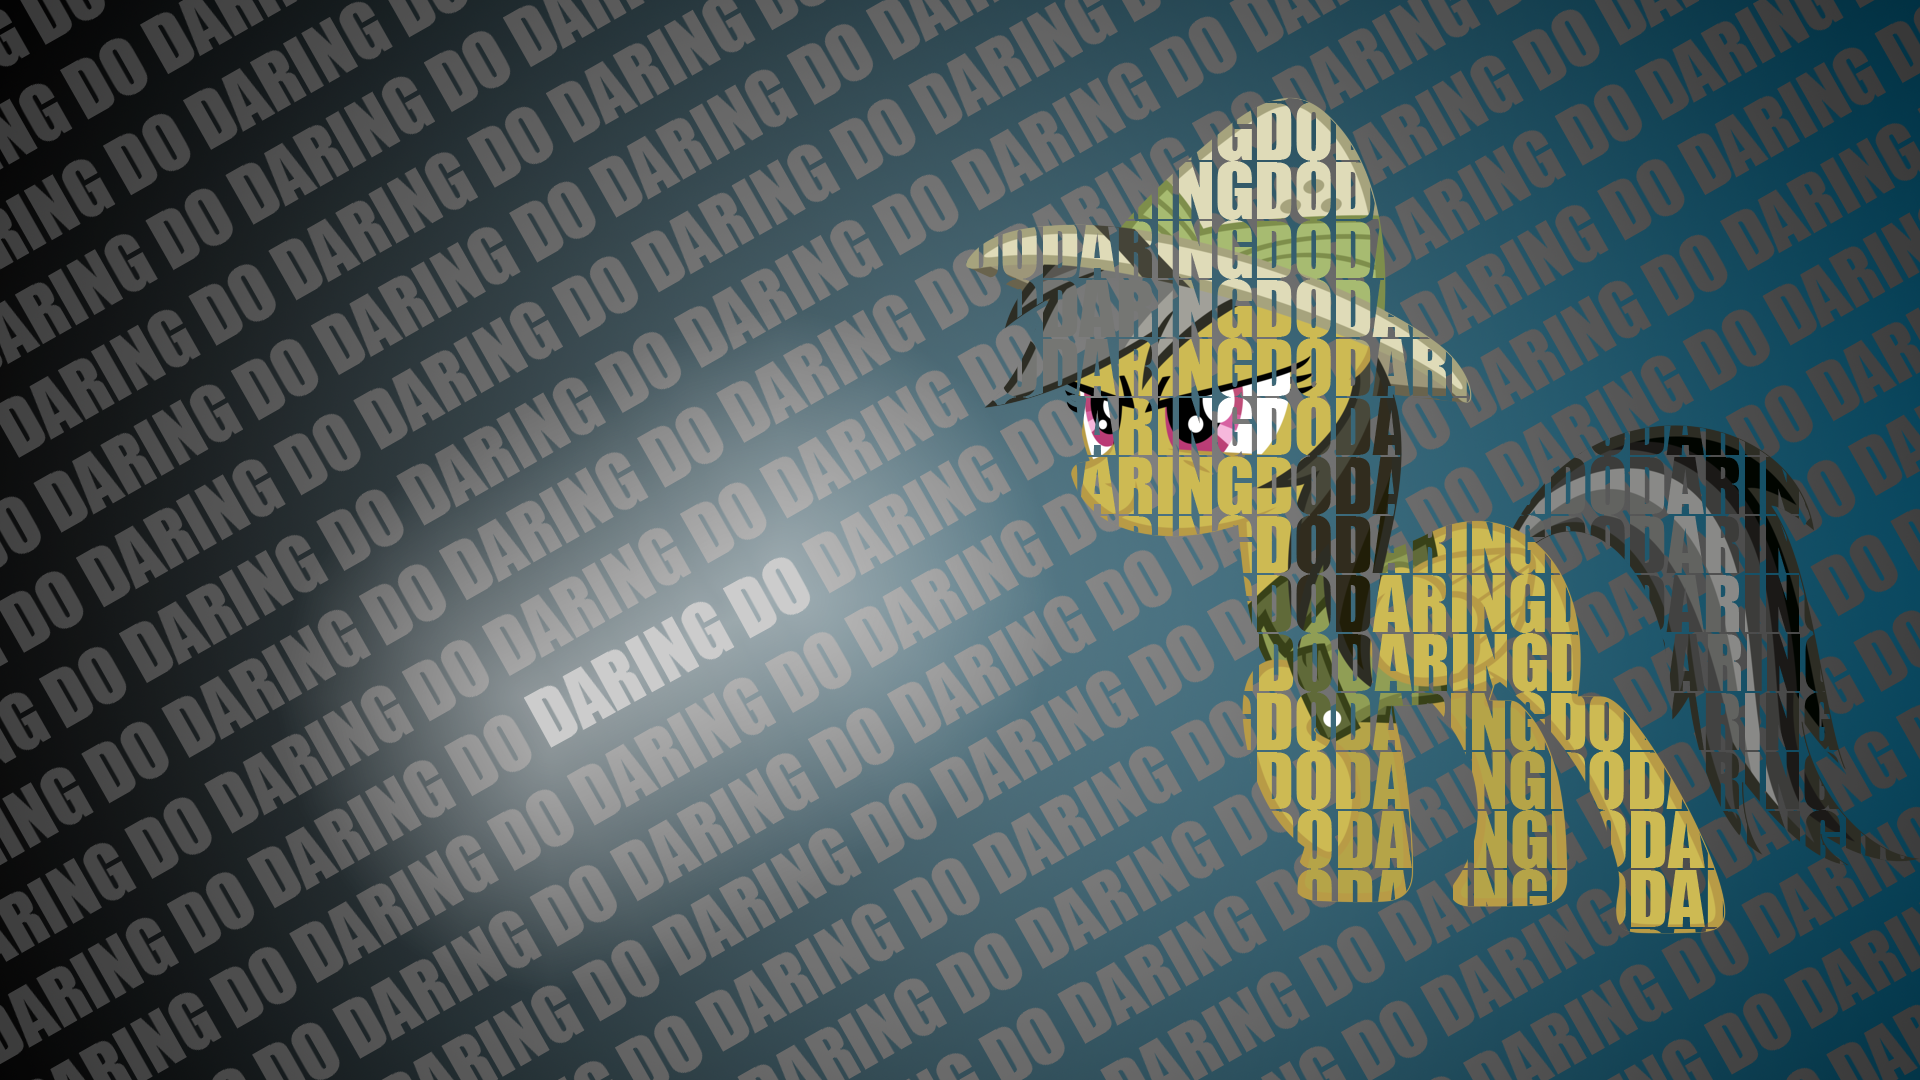 Daring Do Typography Wallpaper [1920x1080] by CoRnFlAkEs369